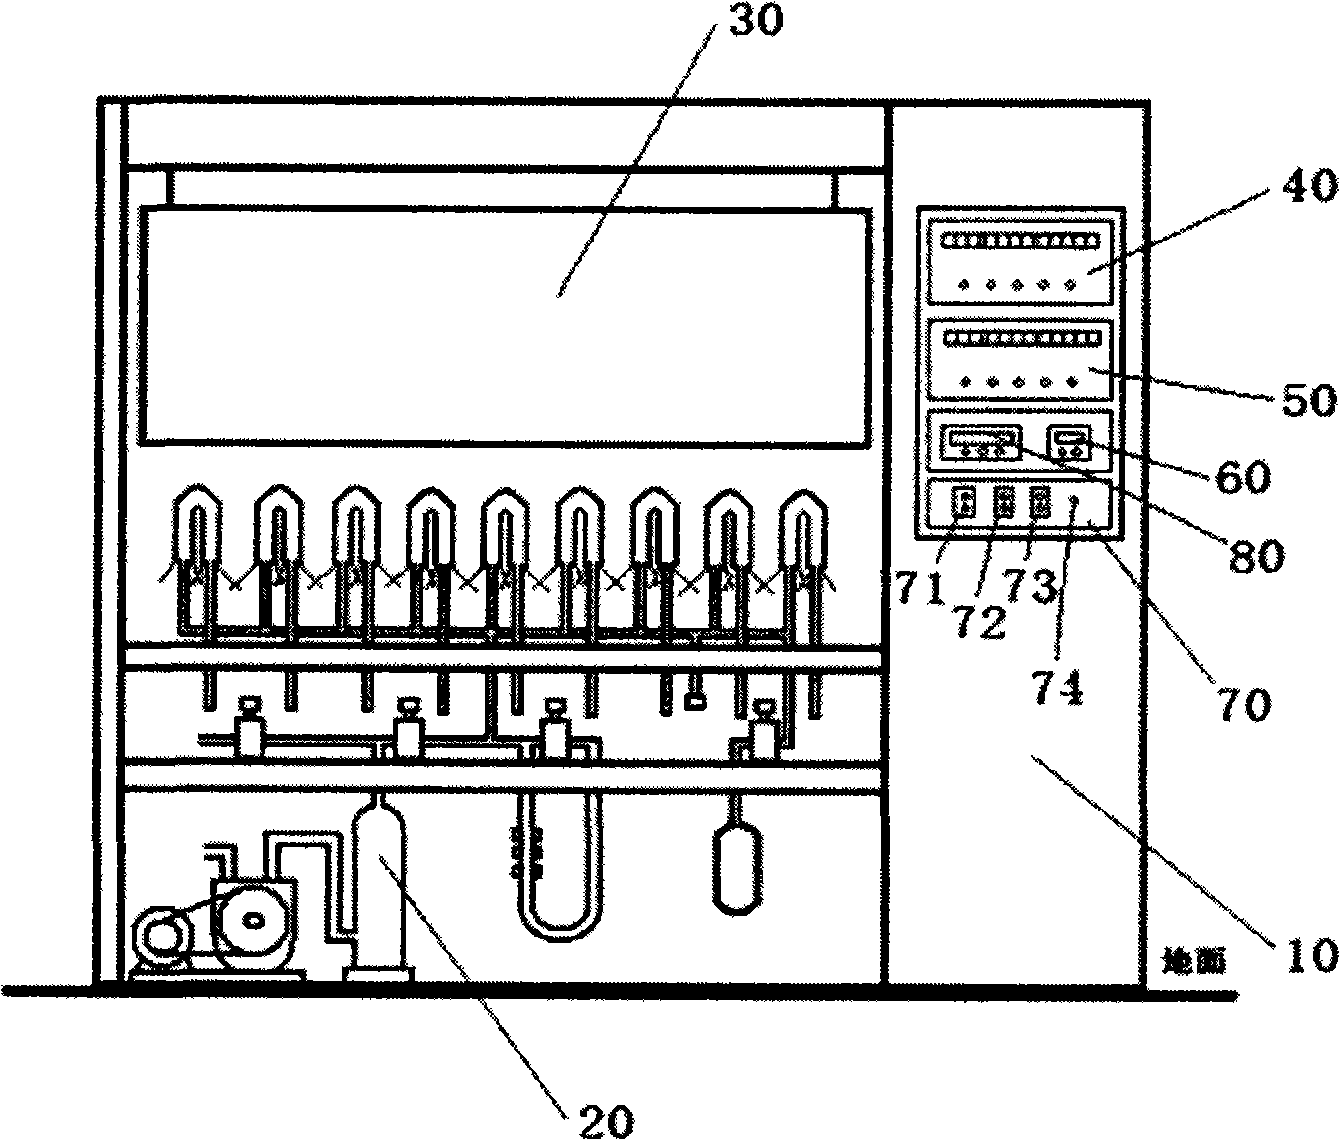 Exhaustion bench for full-automatic glass vacuum system